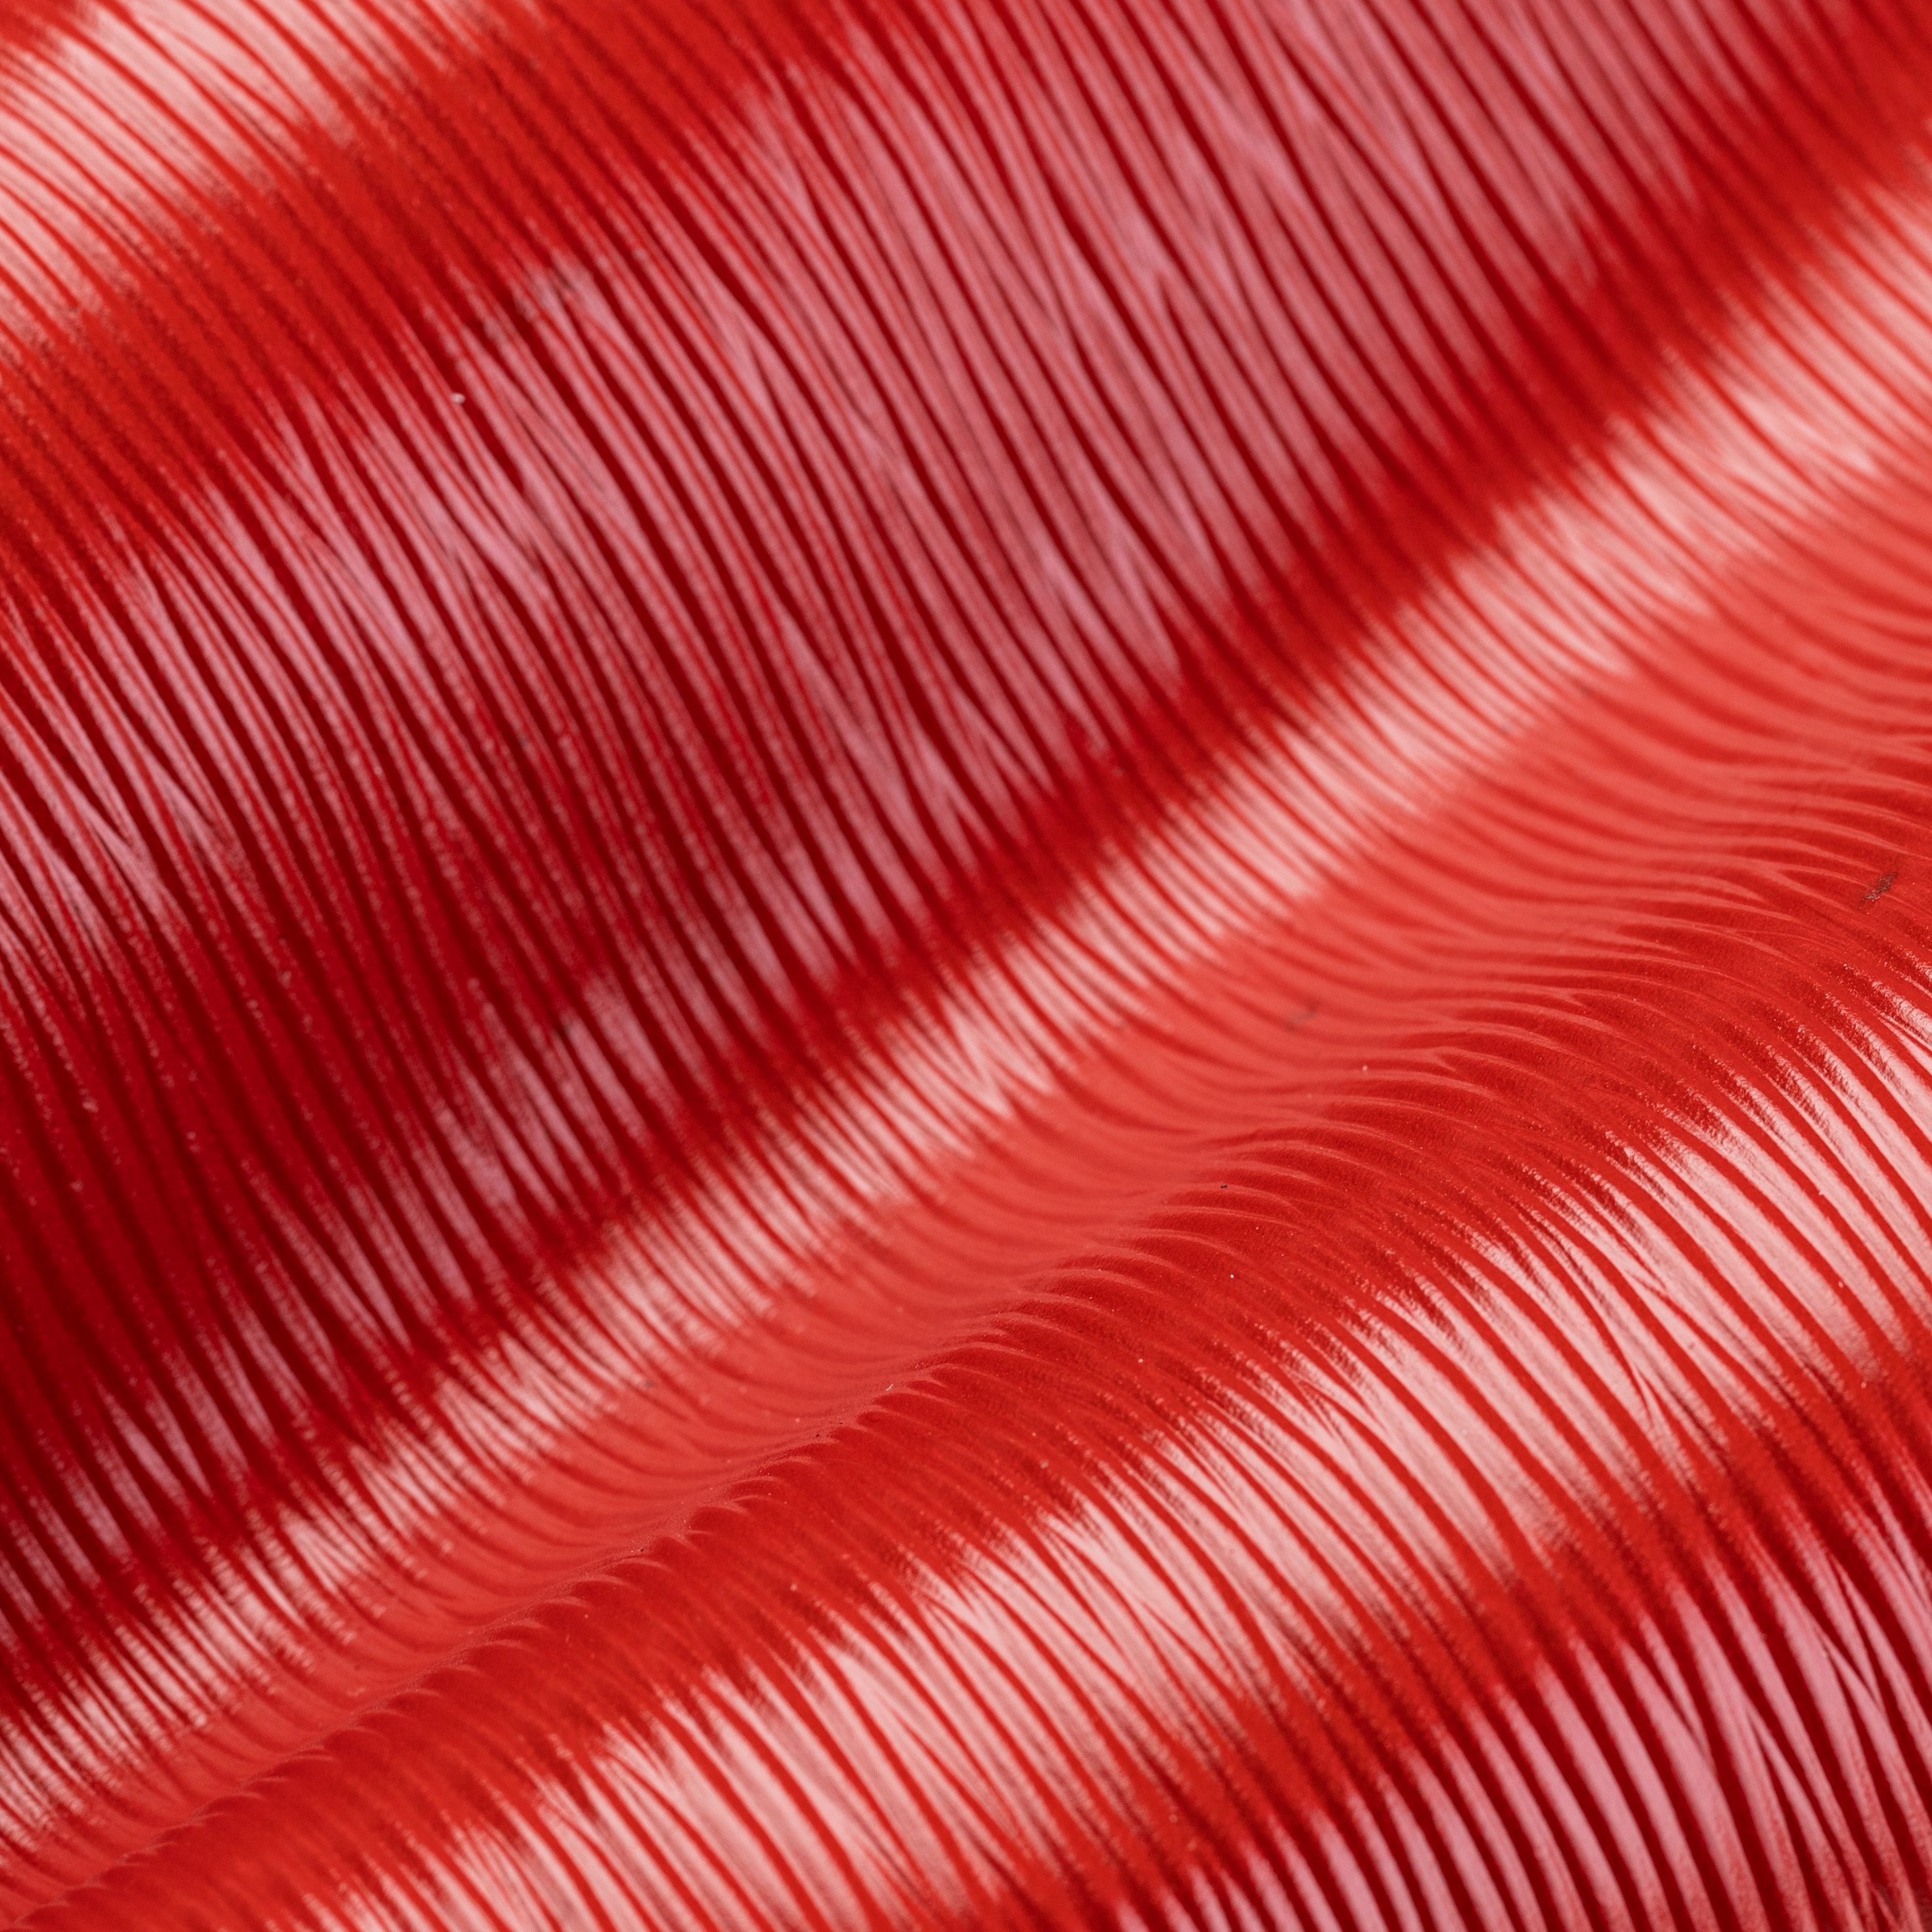 Wavy textured leather Red